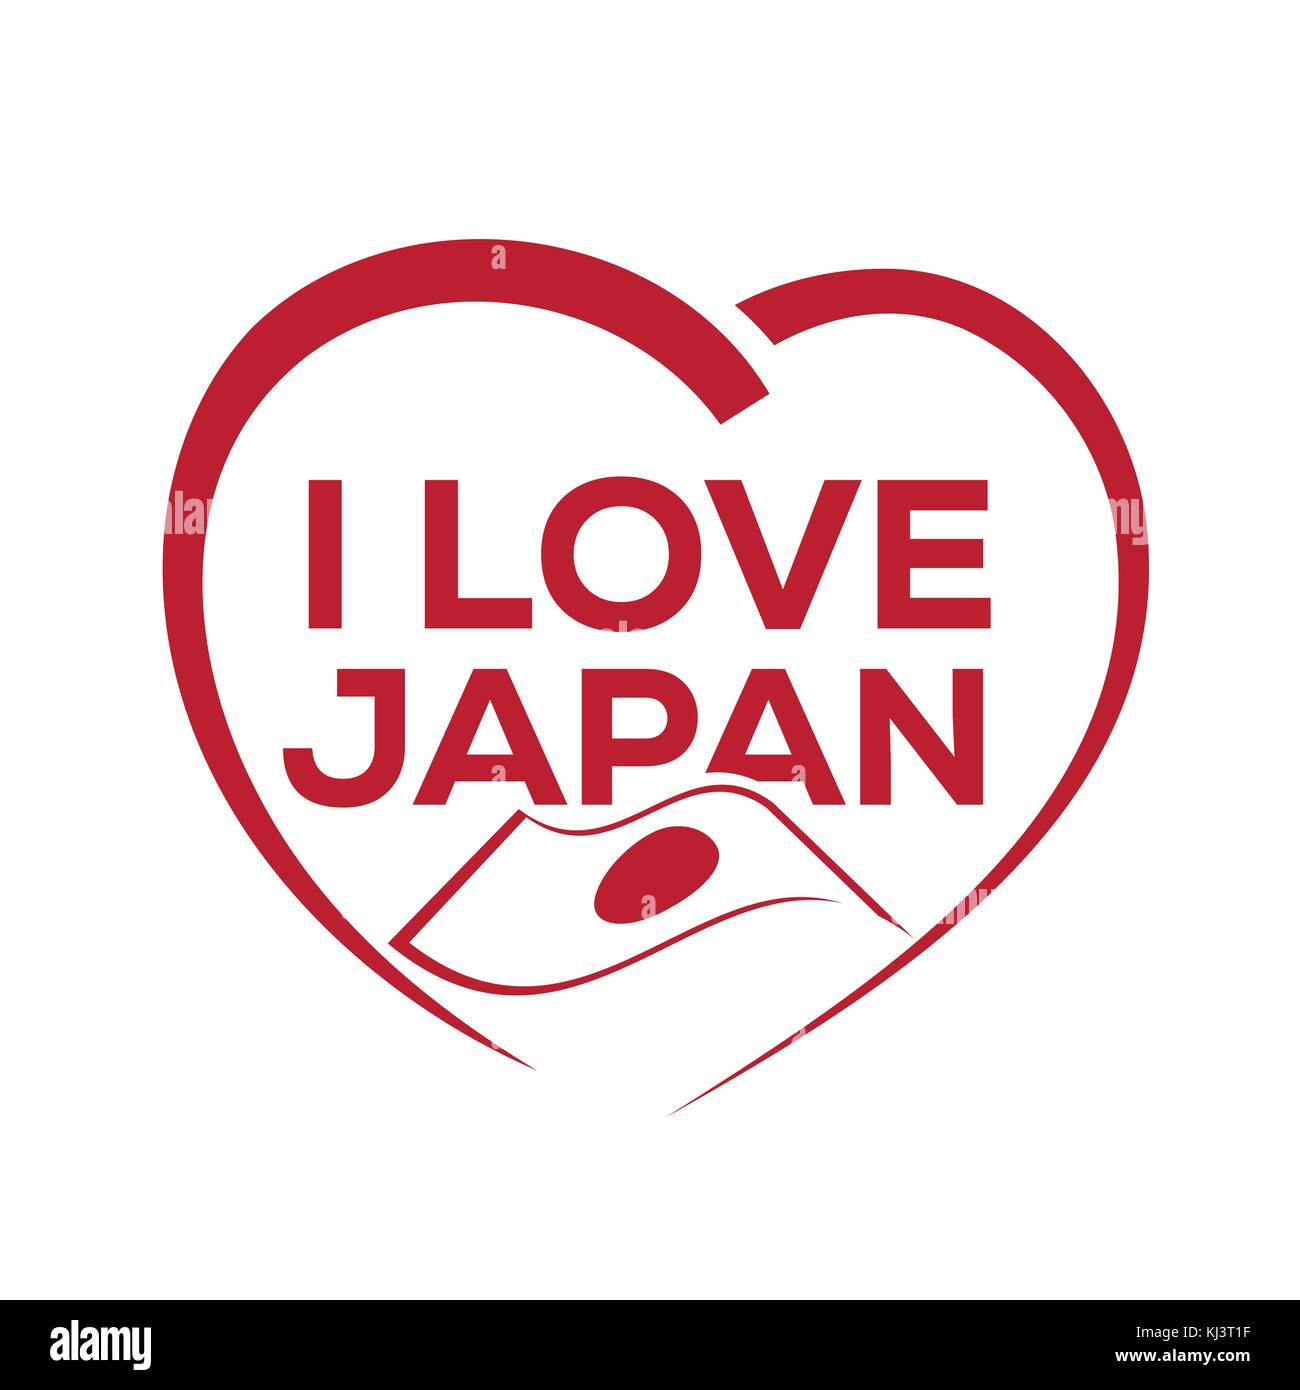 I love japan with outline of heart and japanese flag, icon design